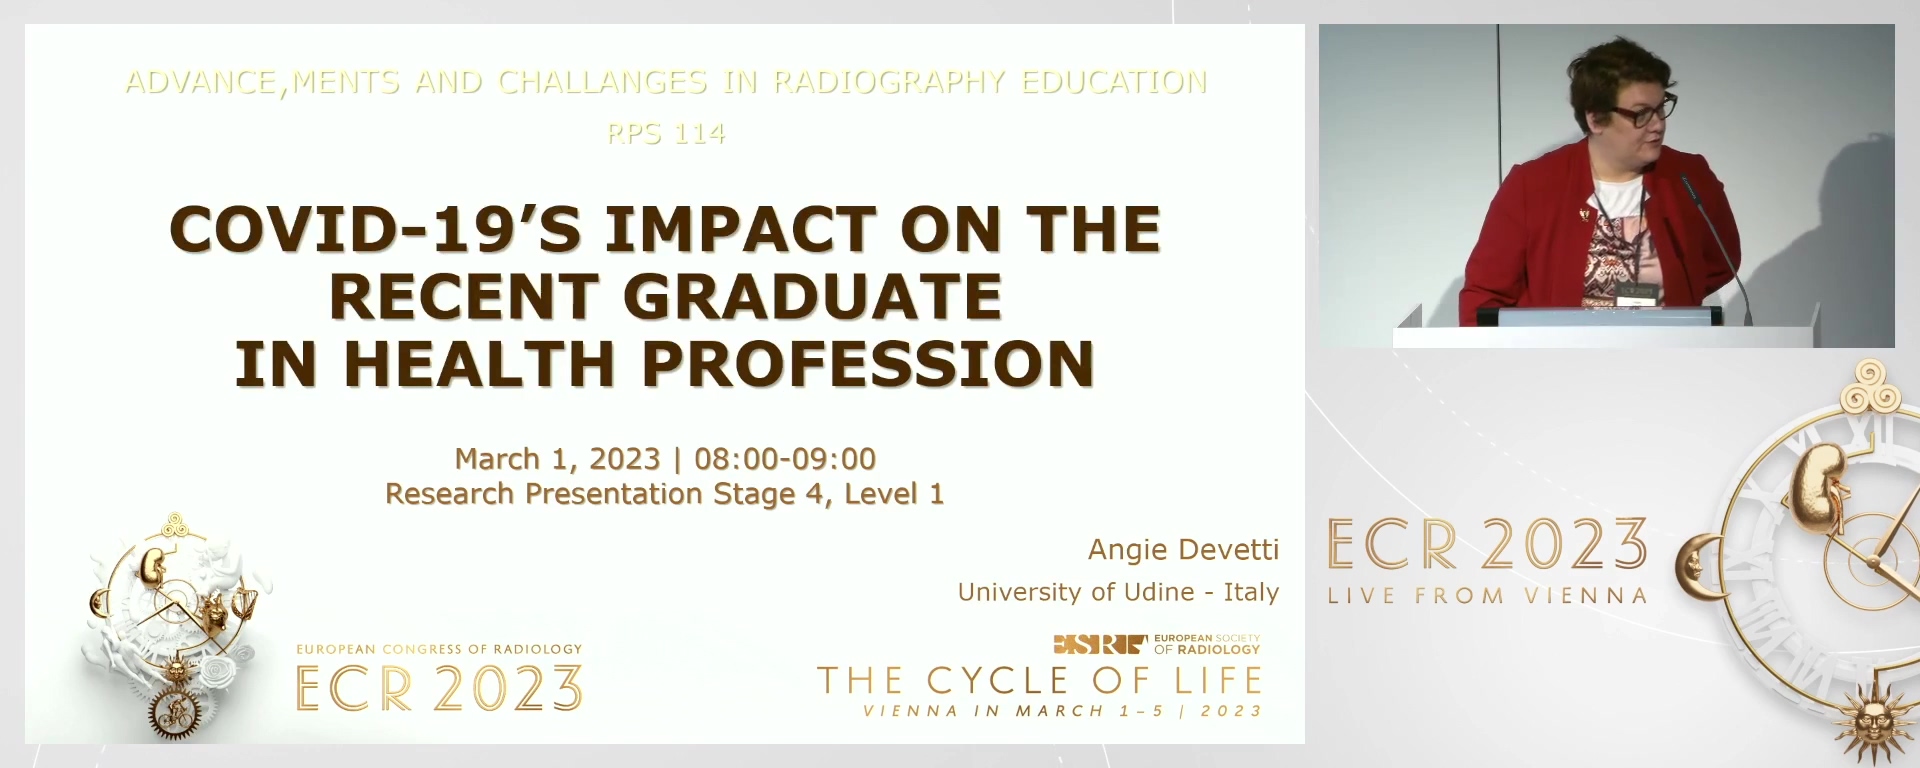 COVID-19's impact on the recent graduate in health professions - Angie  Devetti, Udine / IT